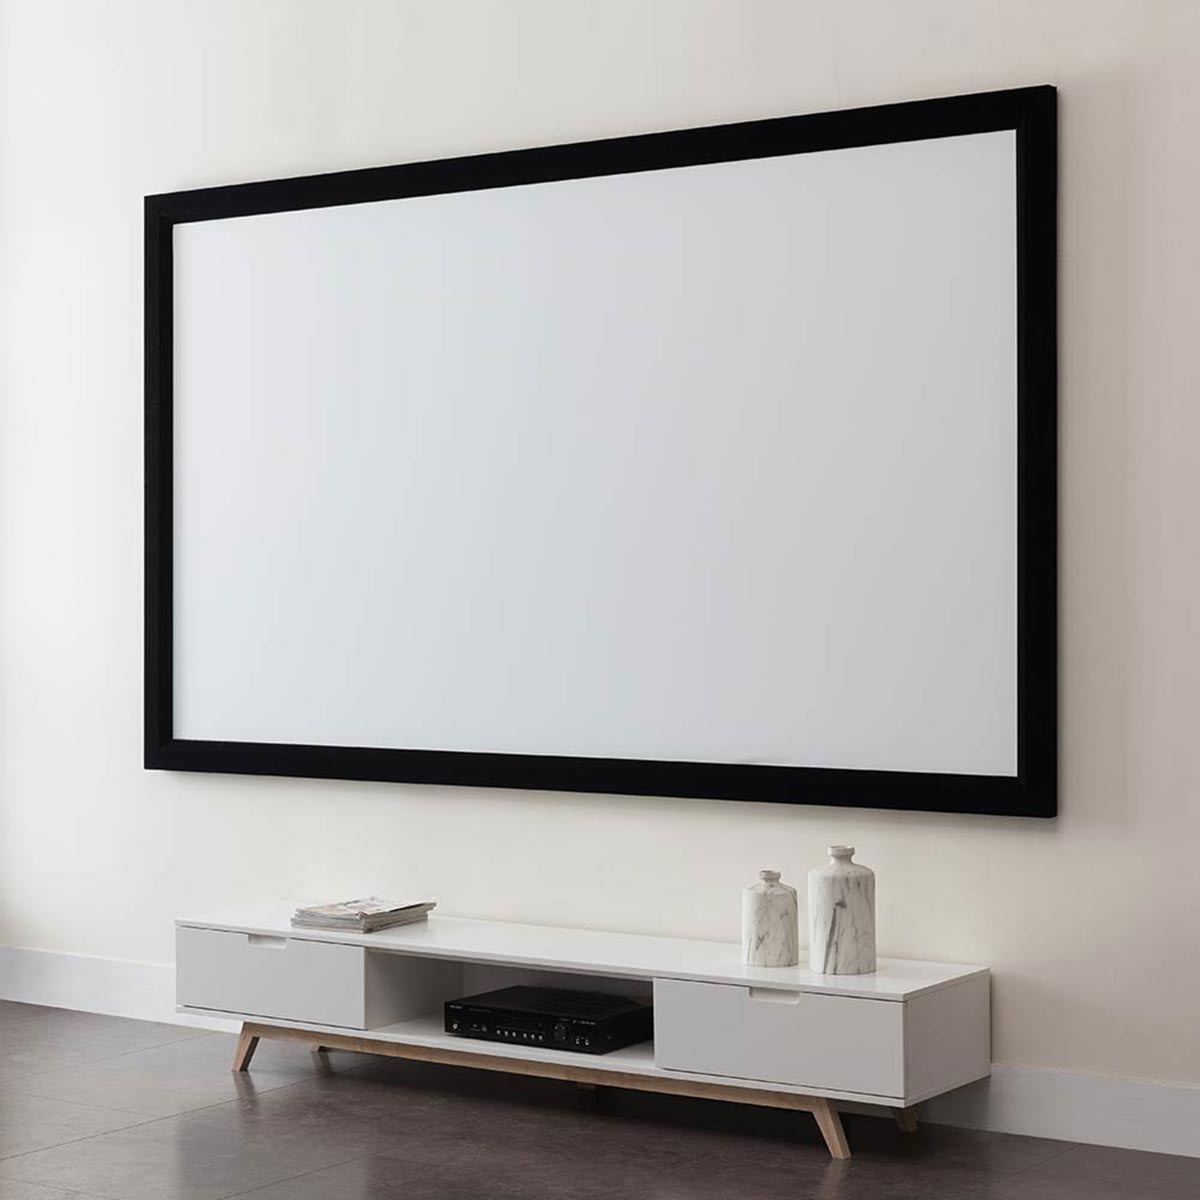 What Can You Use For A Projector Screen